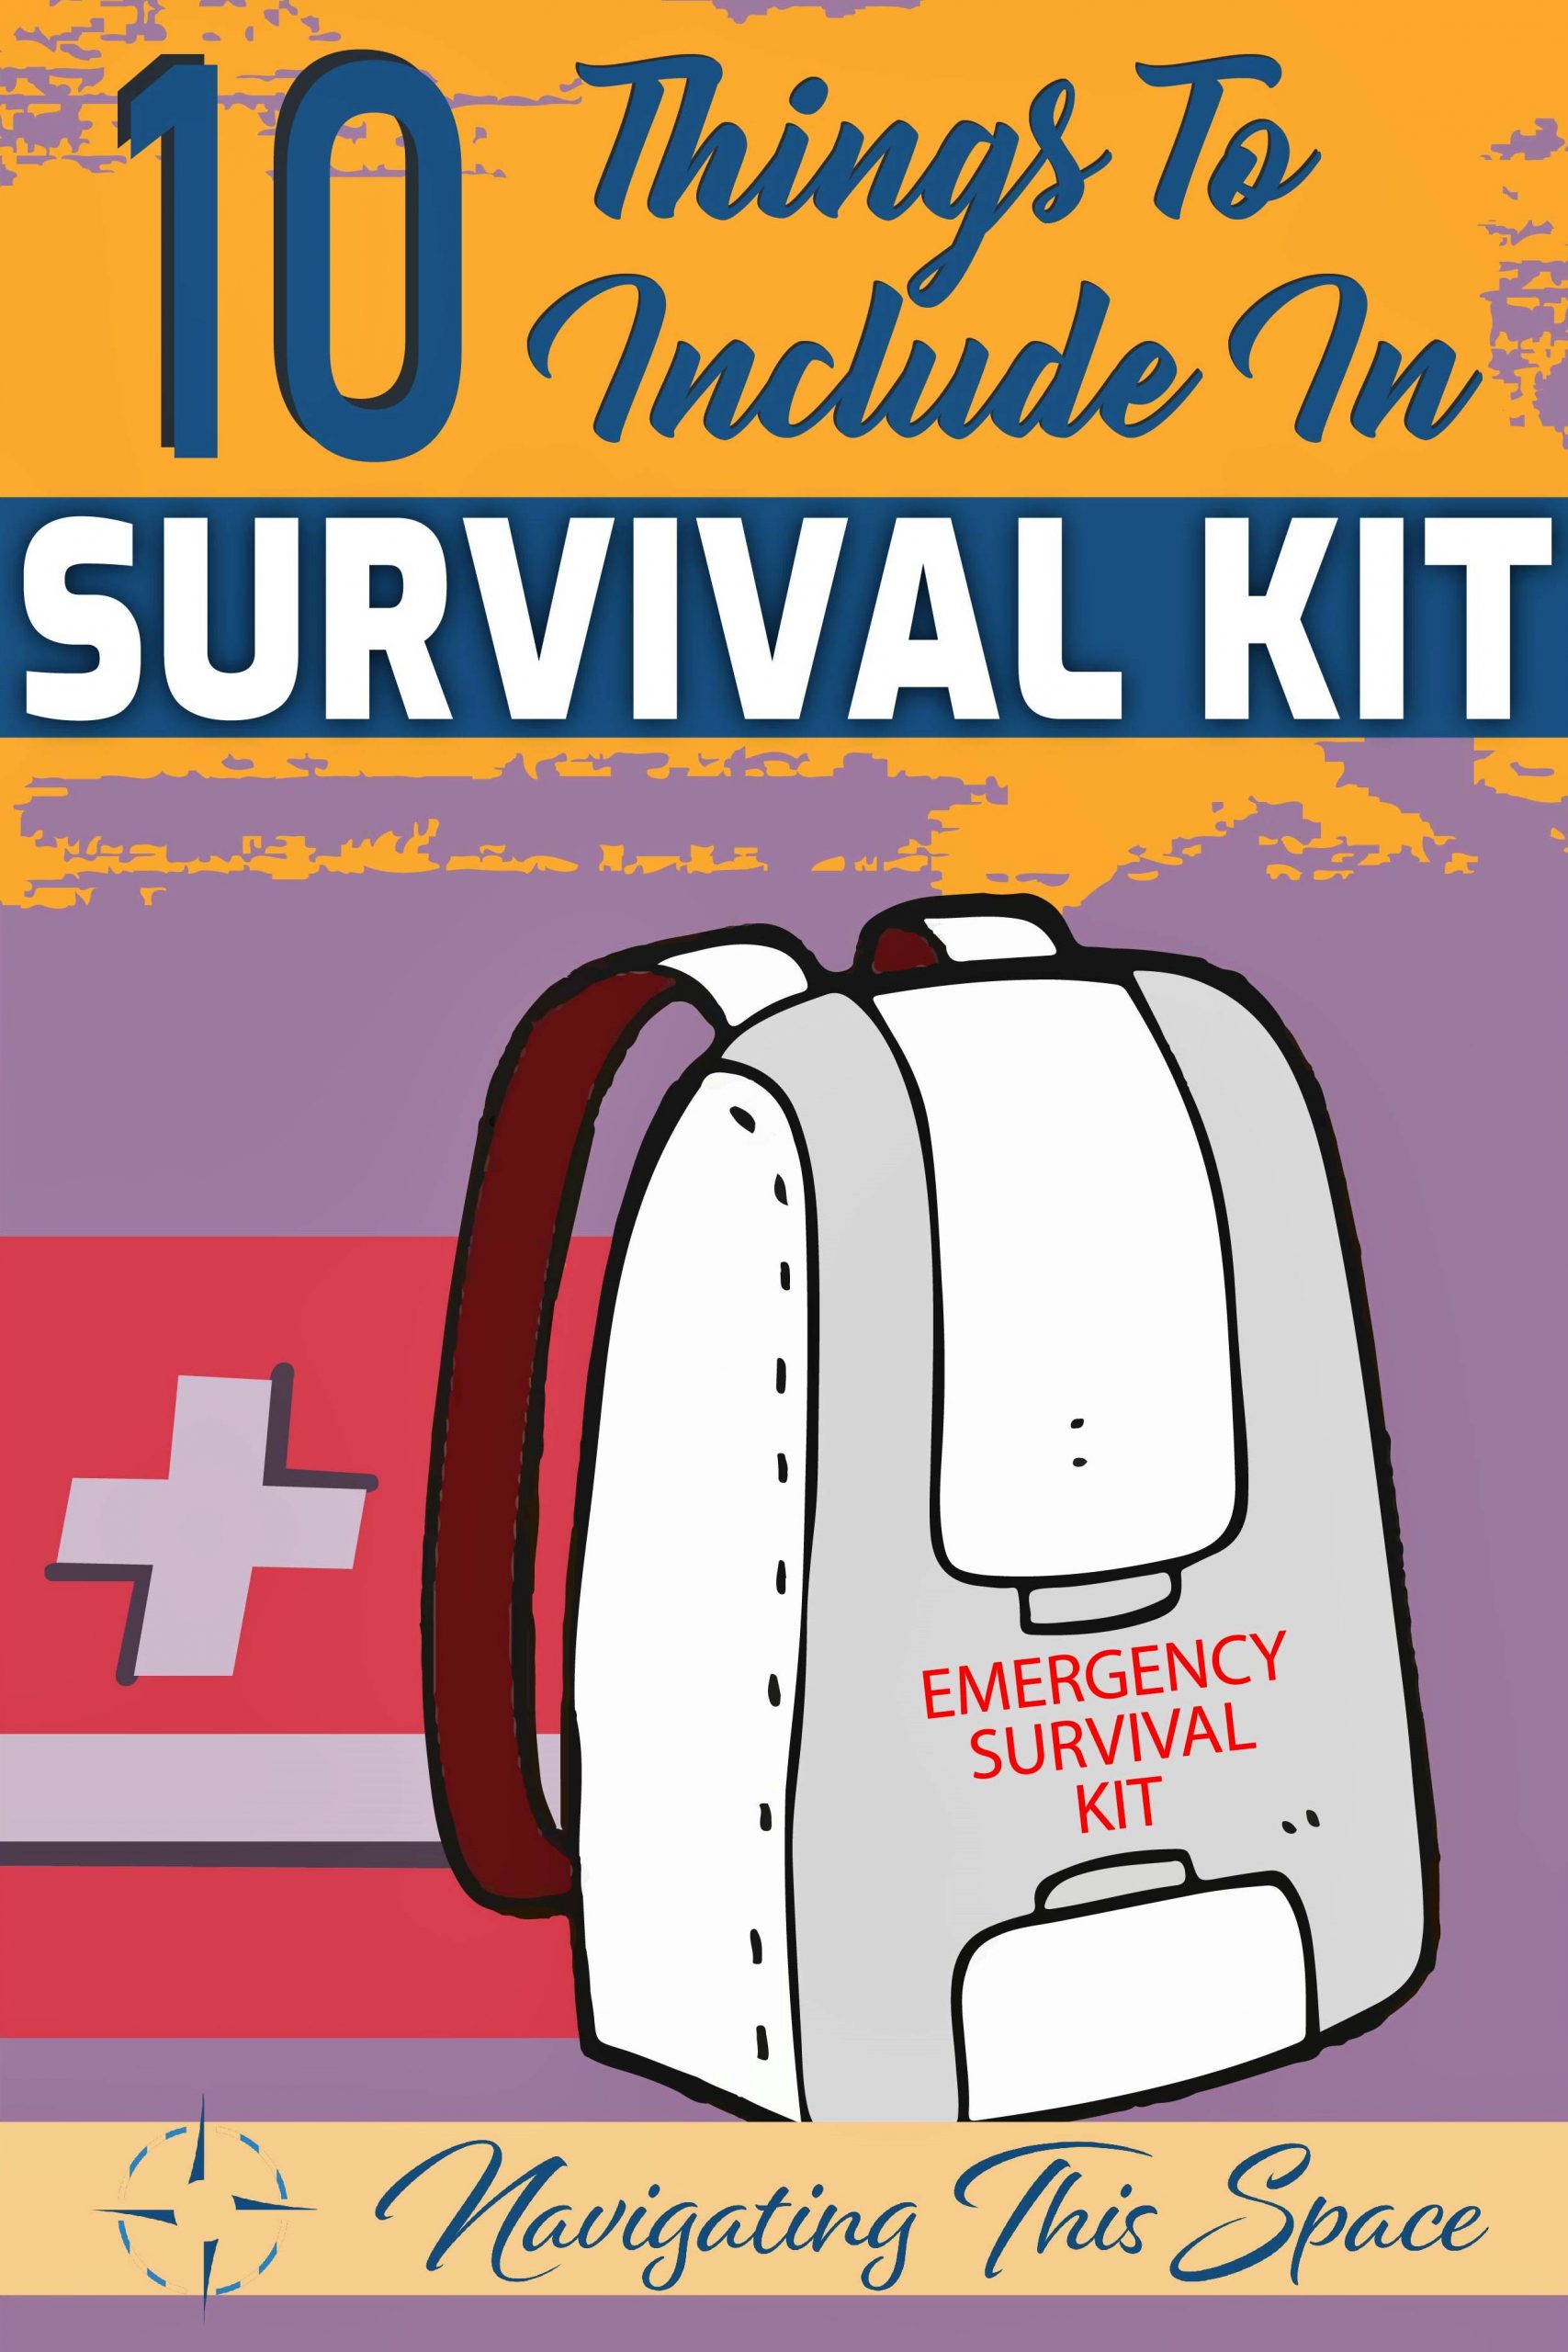 10 Things to include in survival kit